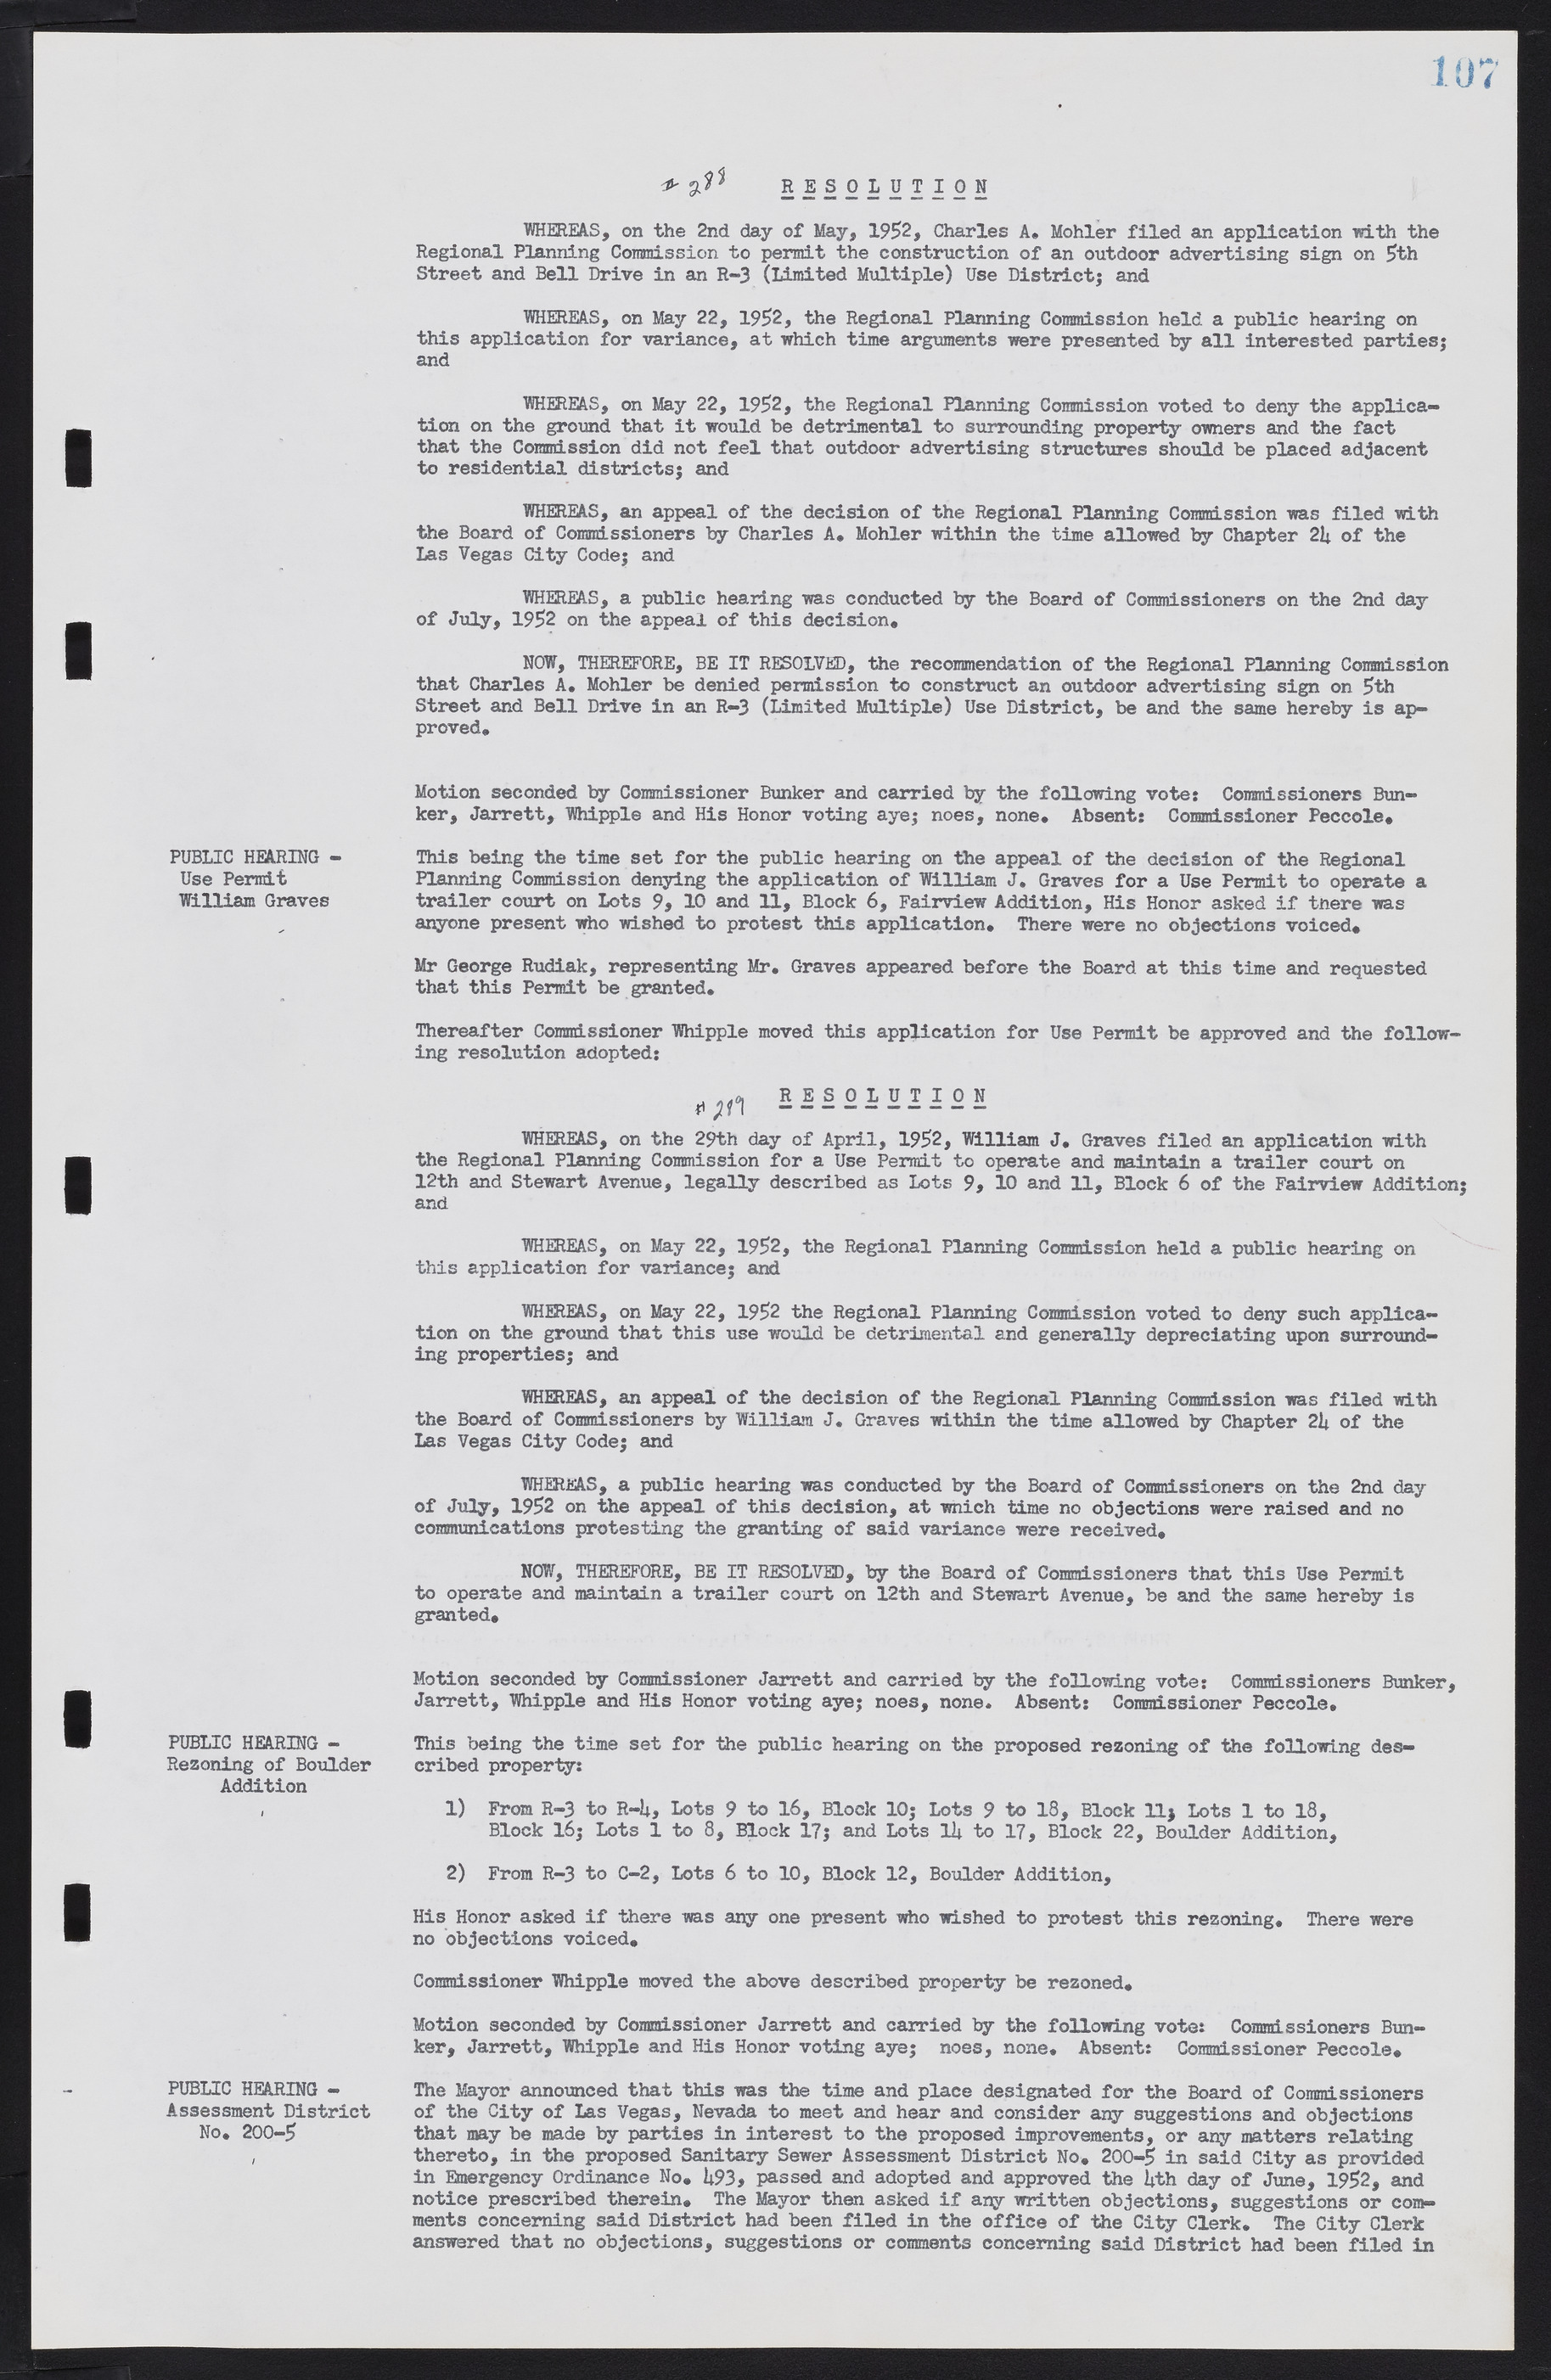 Las Vegas City Commission Minutes, May 26, 1952 to February 17, 1954, lvc000008-113